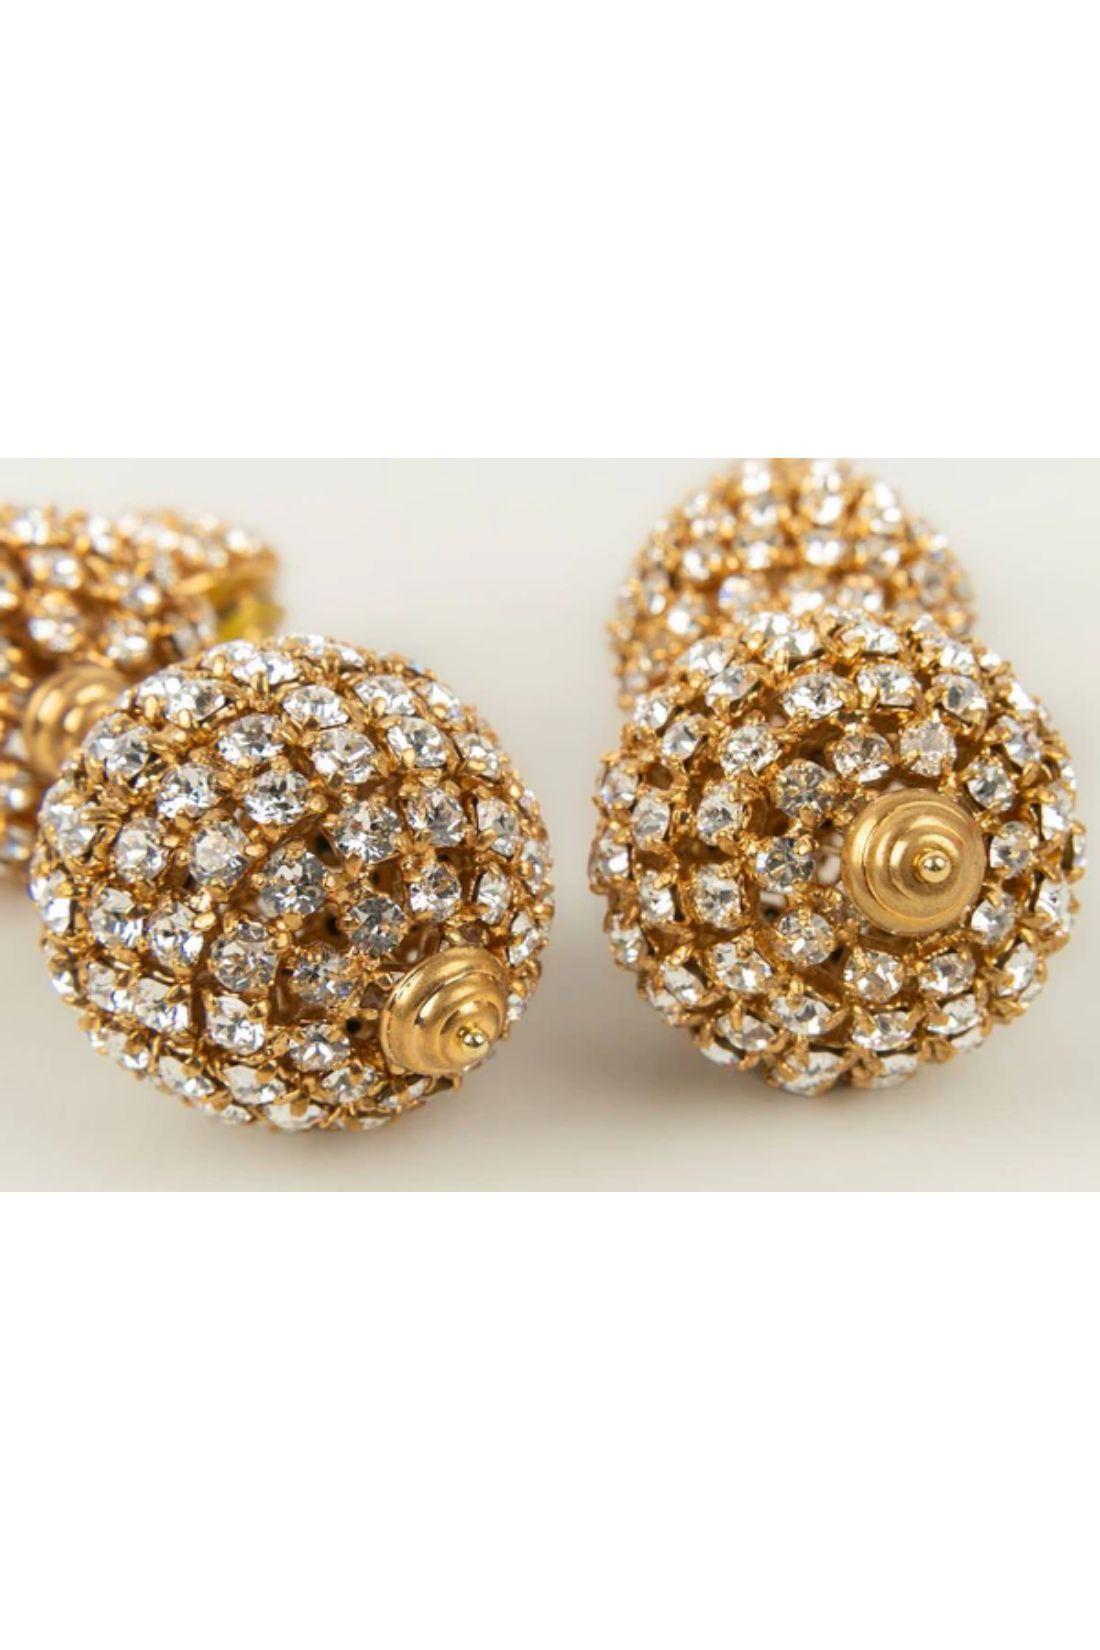 Yves Saint Laurent Earrings with Rhinestones In Excellent Condition For Sale In SAINT-OUEN-SUR-SEINE, FR